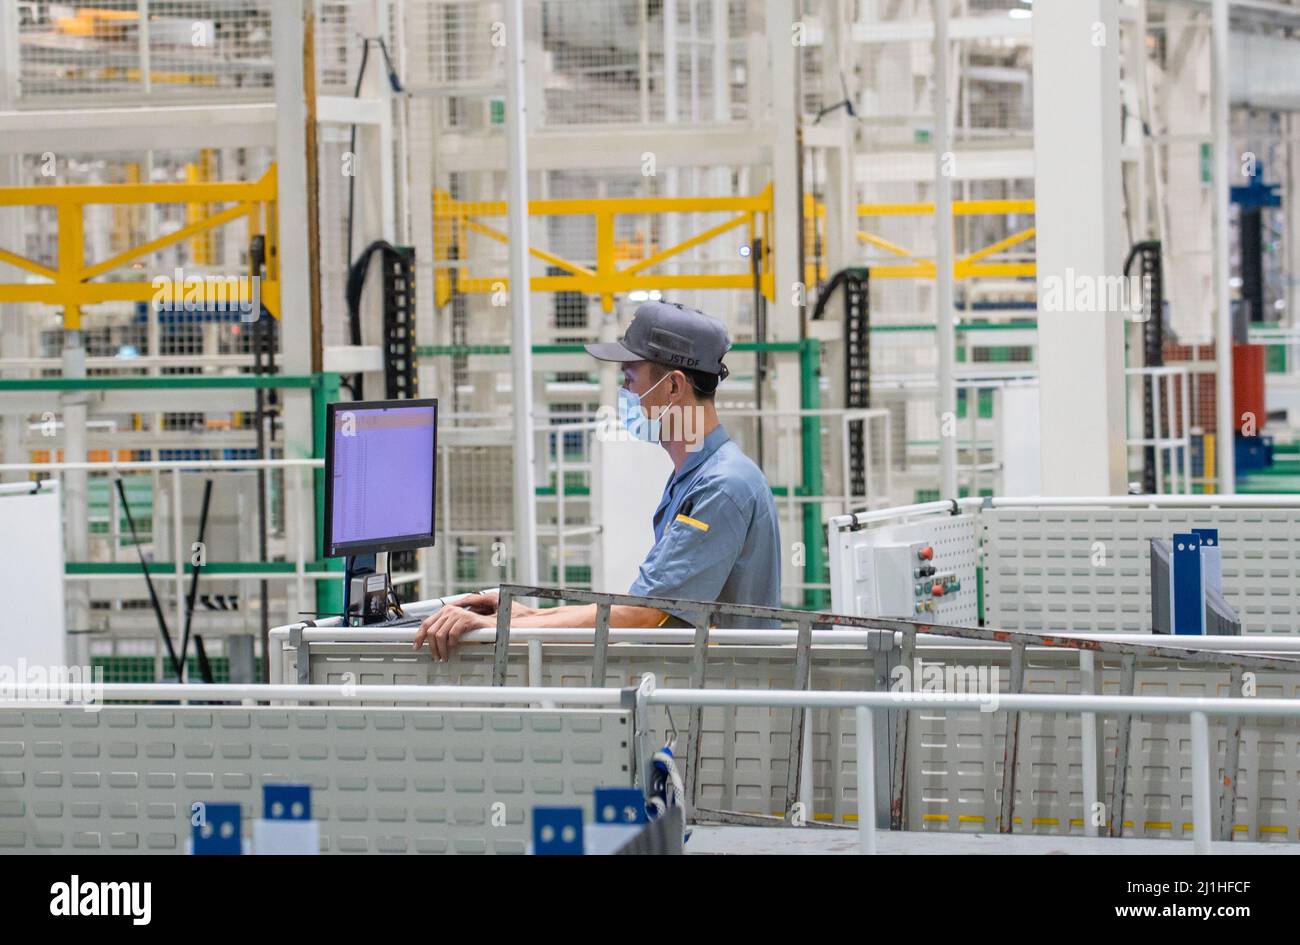 HAIKOU, CHINA - MARCH 23, 2022 - A man and a machine work together in an  assembly workshop of a digital factory in Haikou, Hainan Province, China,  March 23, 2022. Haikou digital